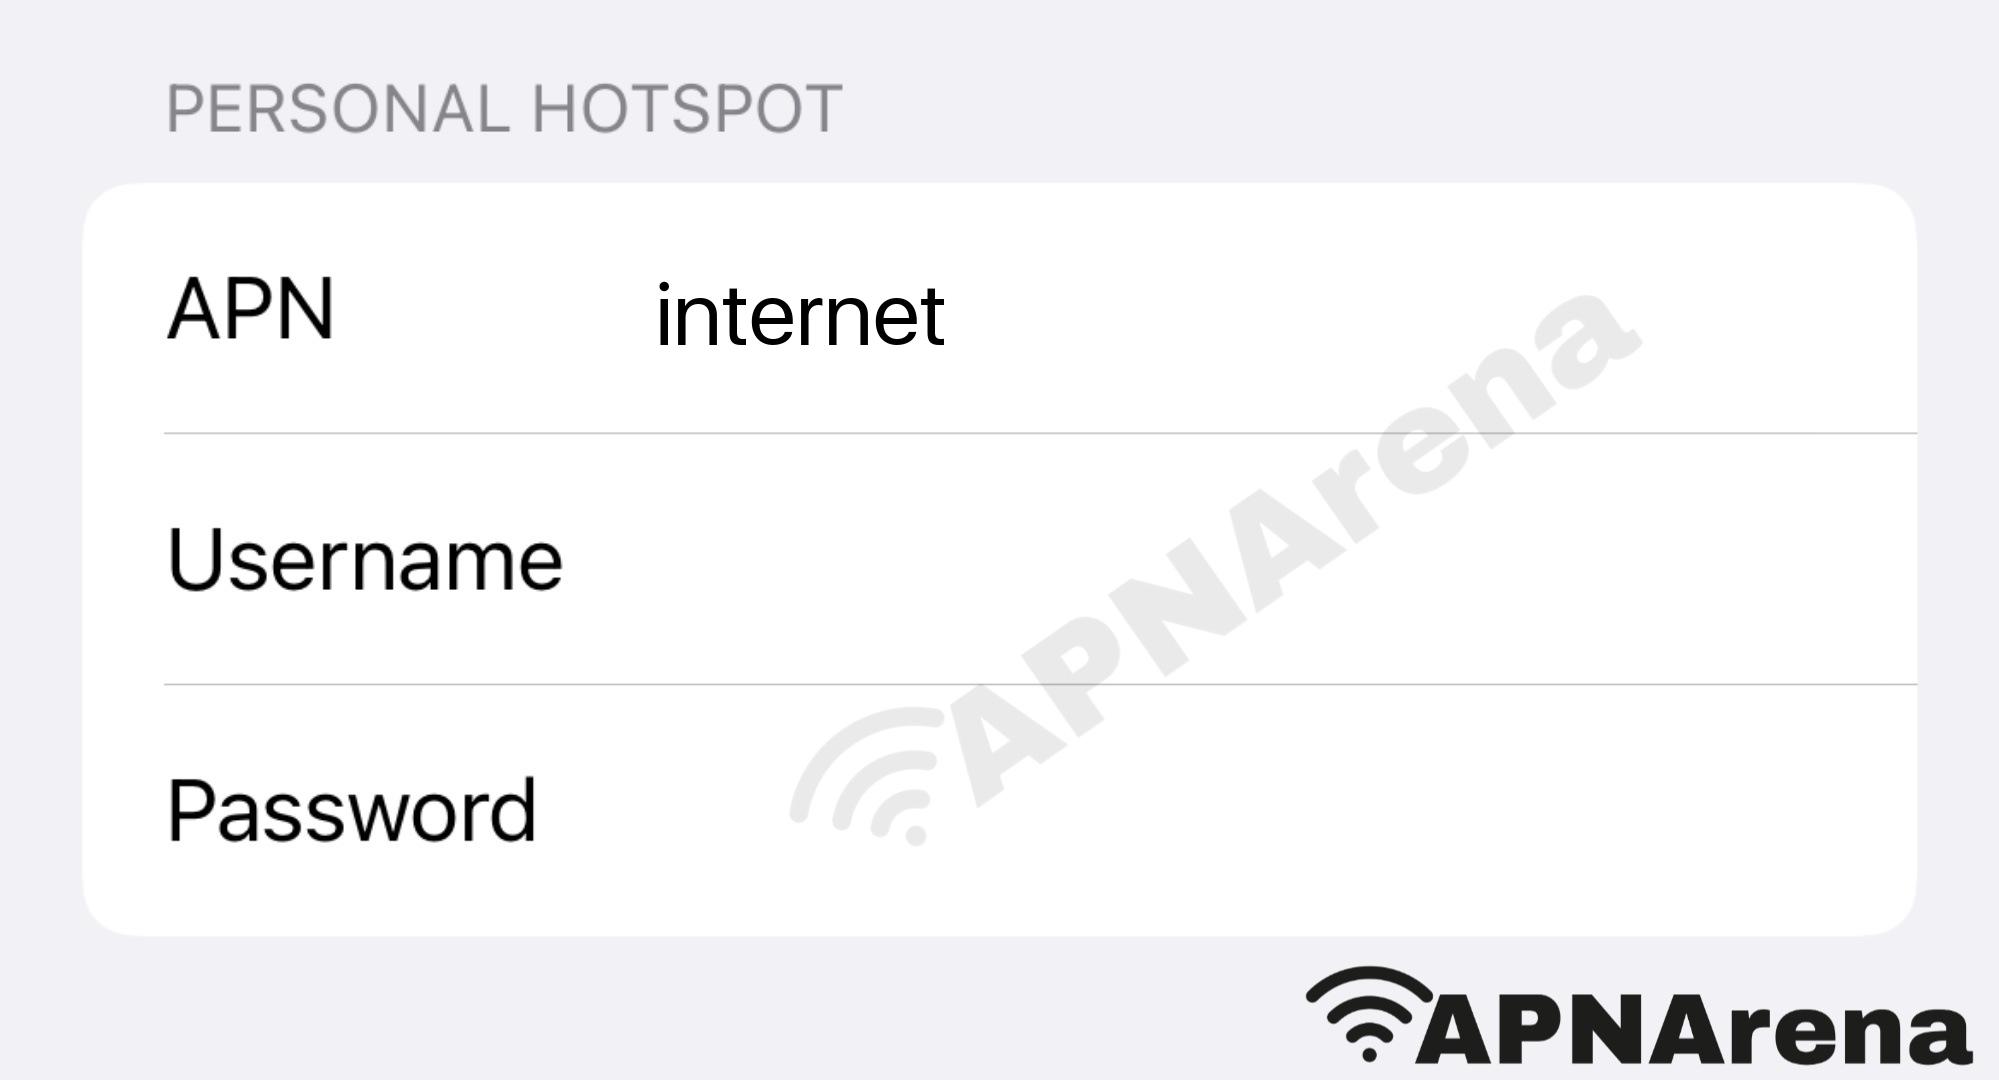 i-wireless Personal Hotspot Settings for iPhone